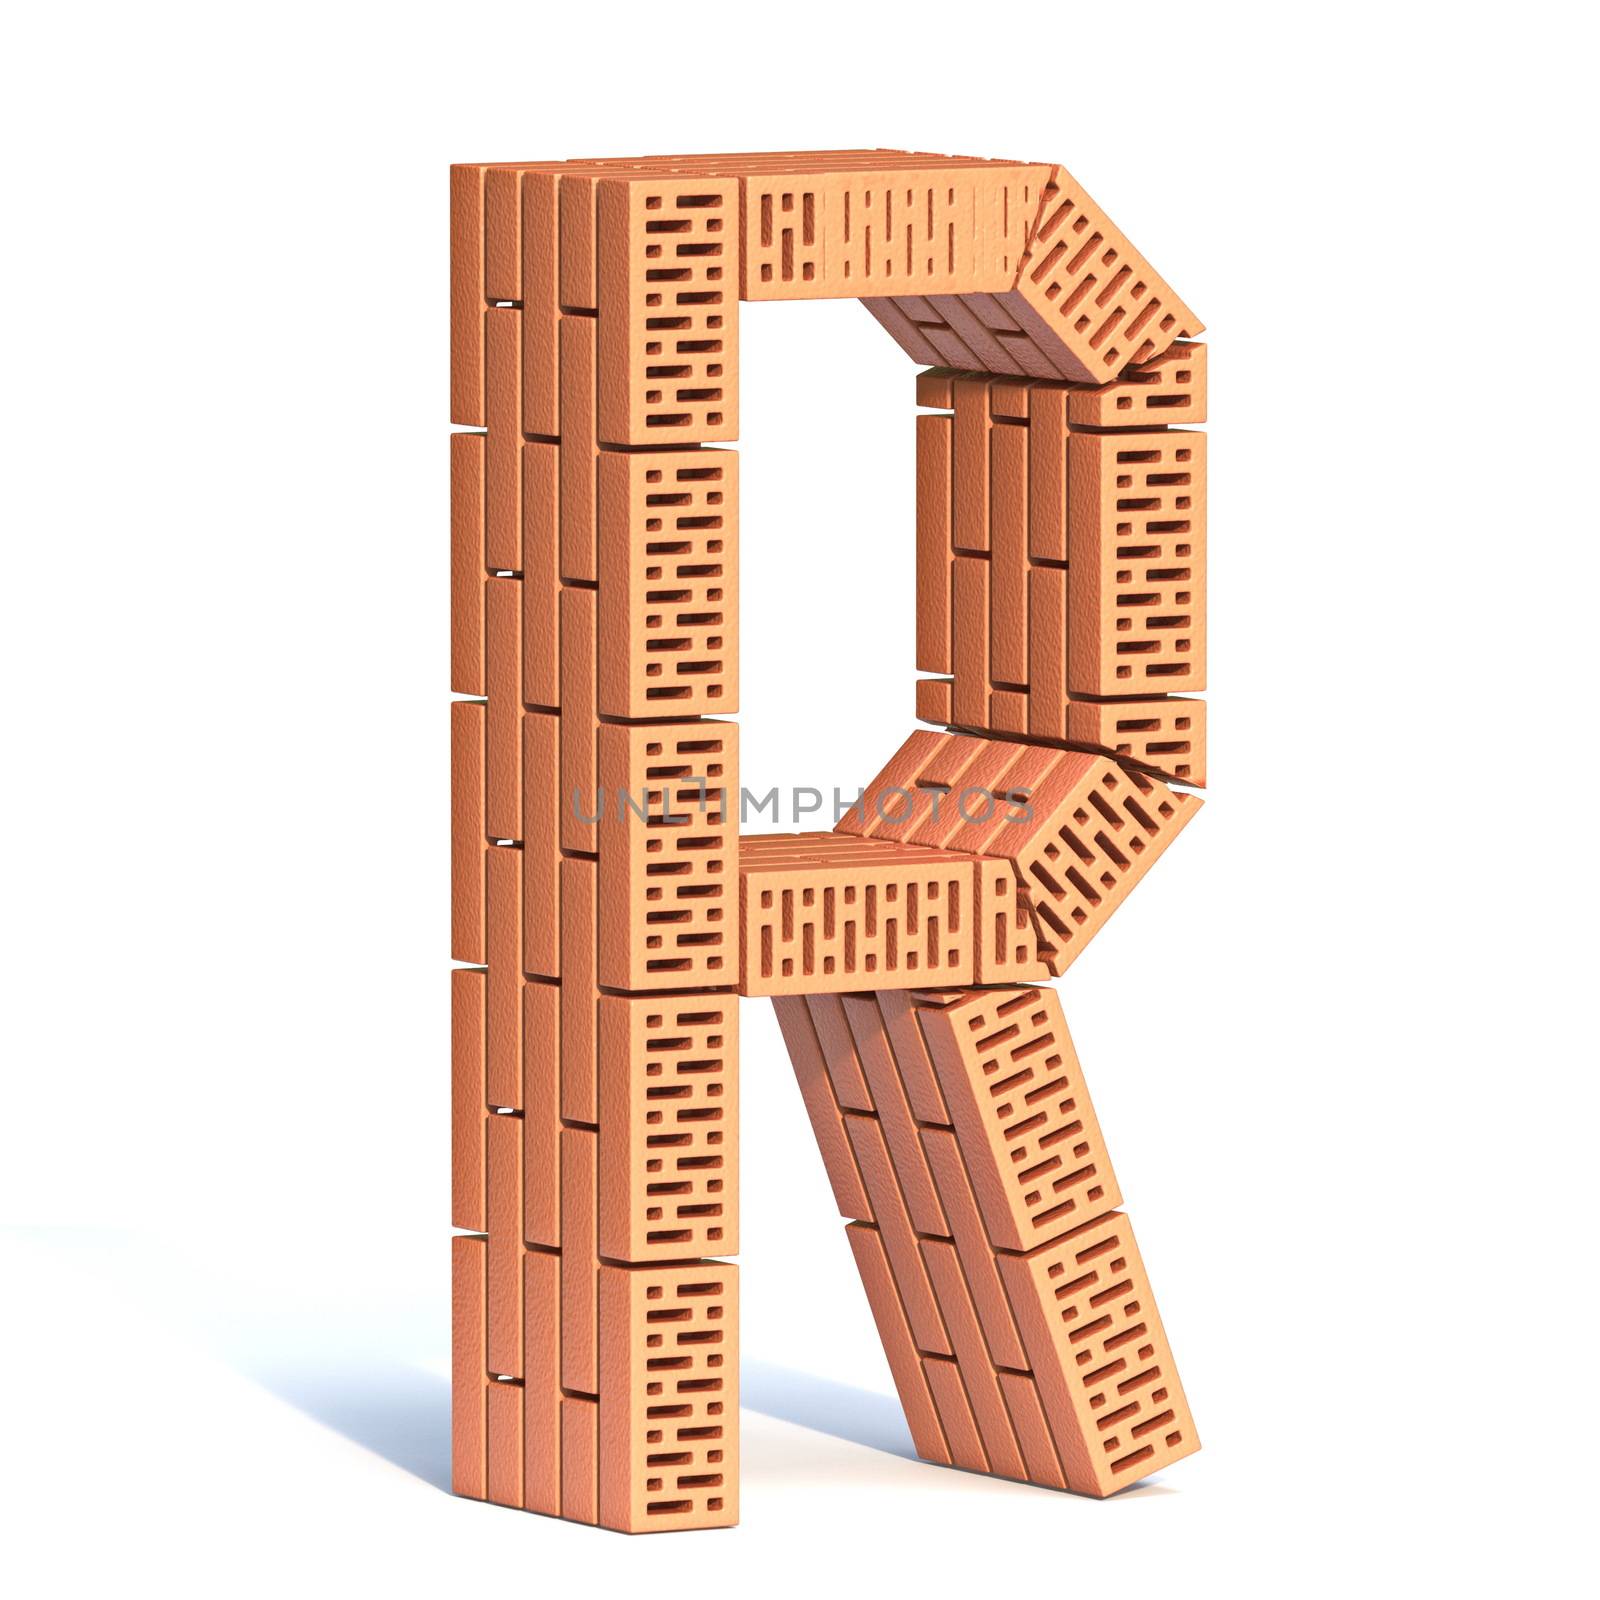 Brick wall font Letter R 3D render illustration isolated on white background